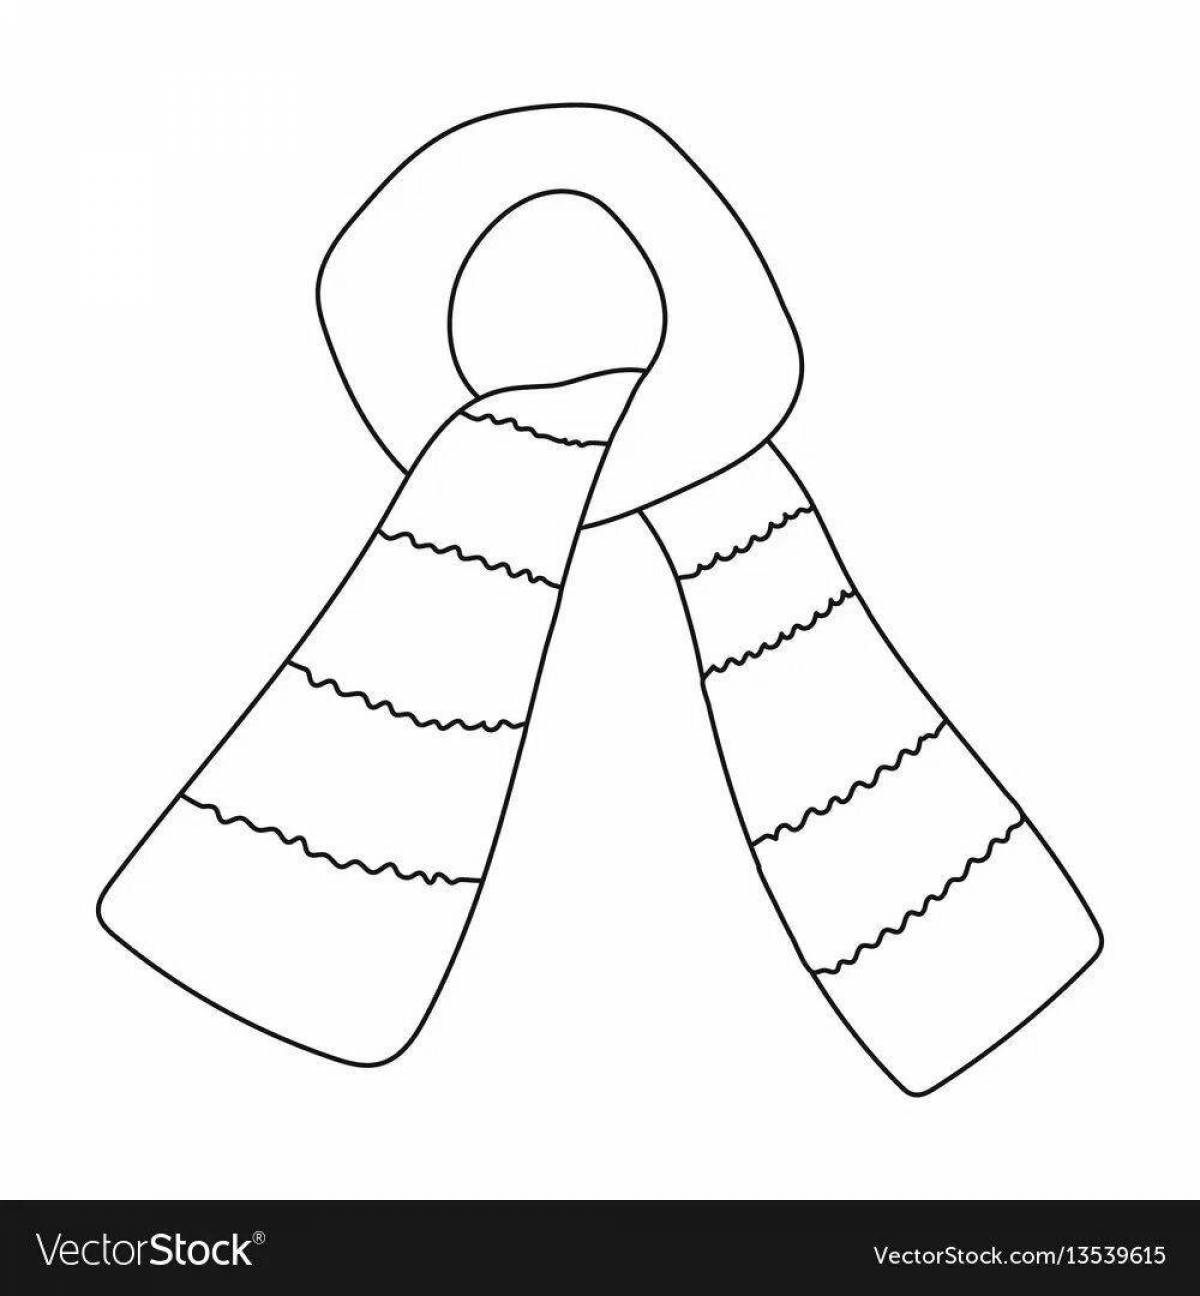 Coloring page cute scarf for 2-3 year olds